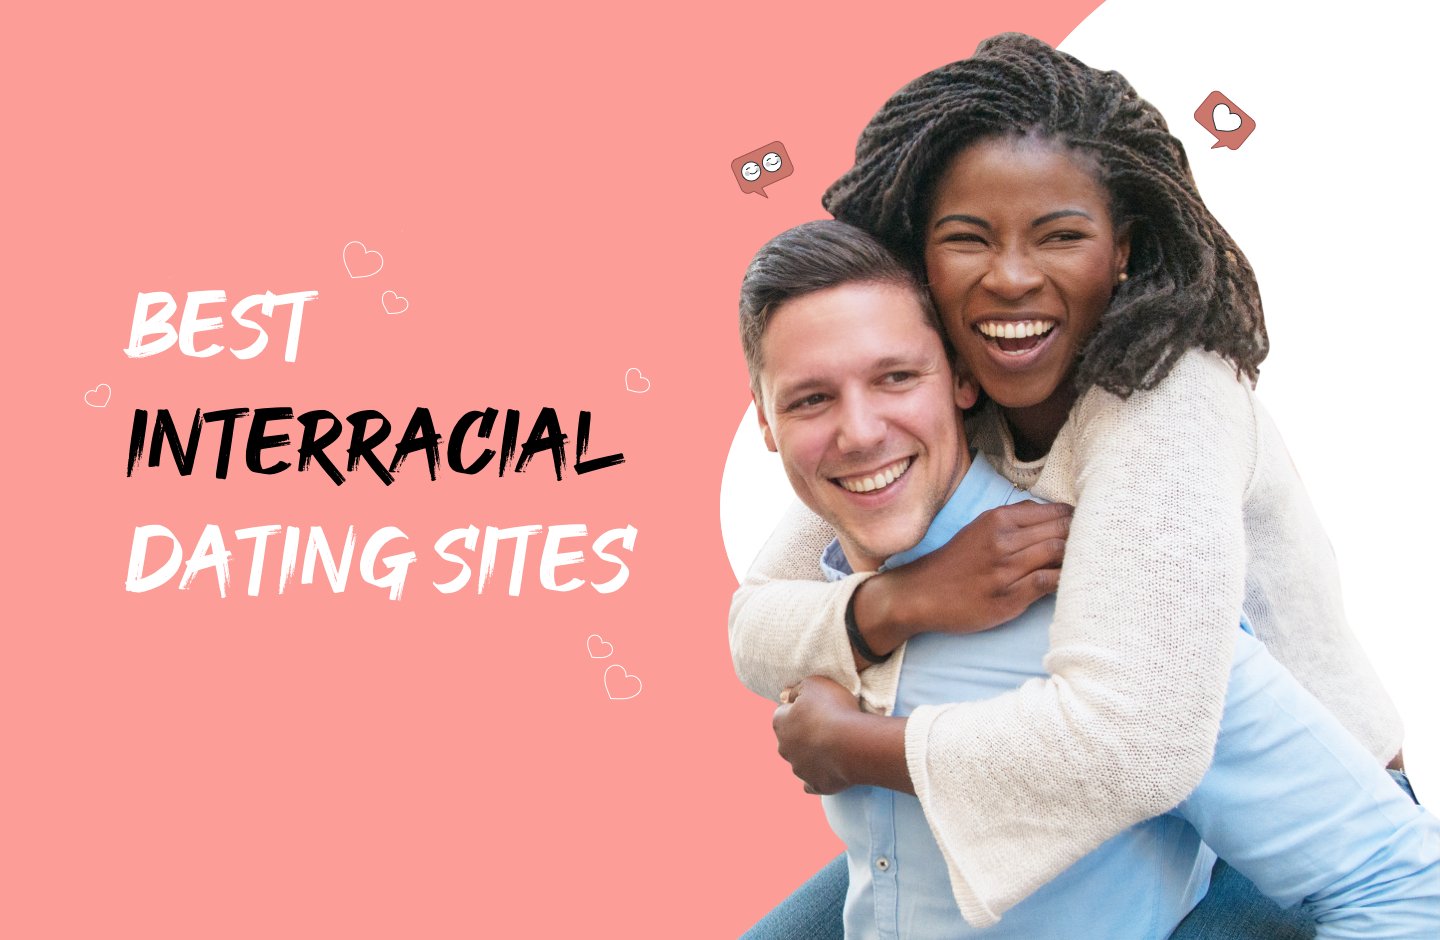 interracial dating sites that